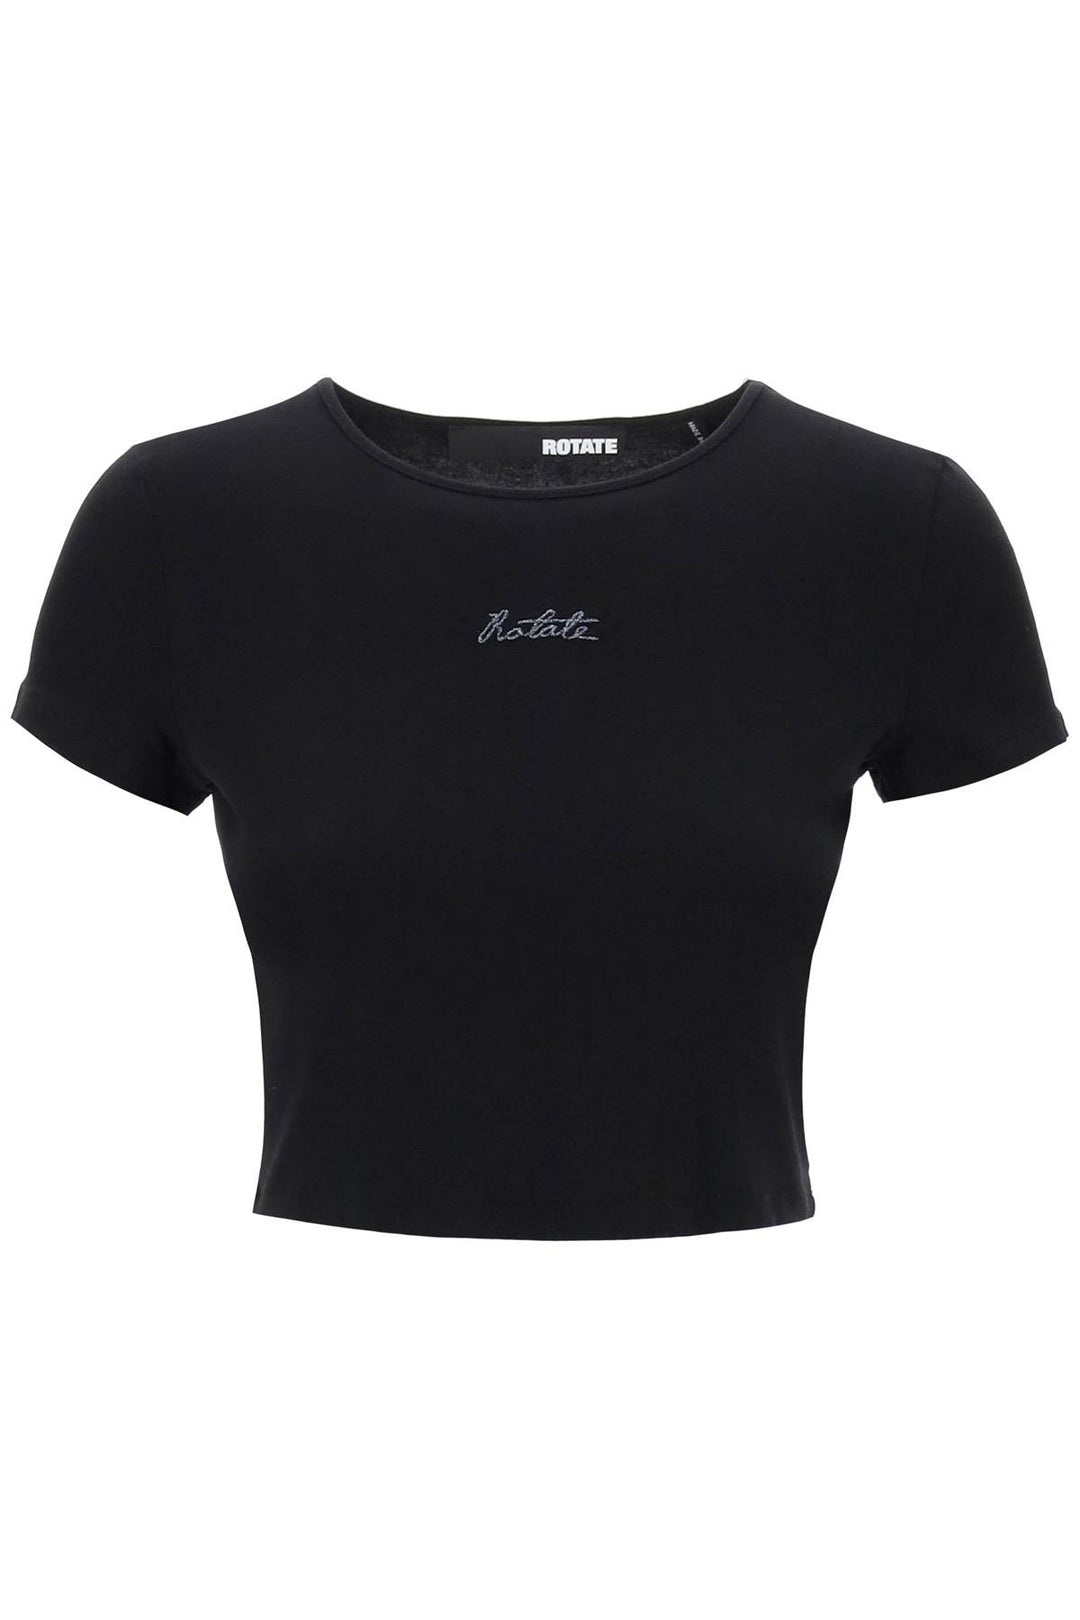 Rotate Cropped T Shirt With Embroidered Lurex Logo   Nero